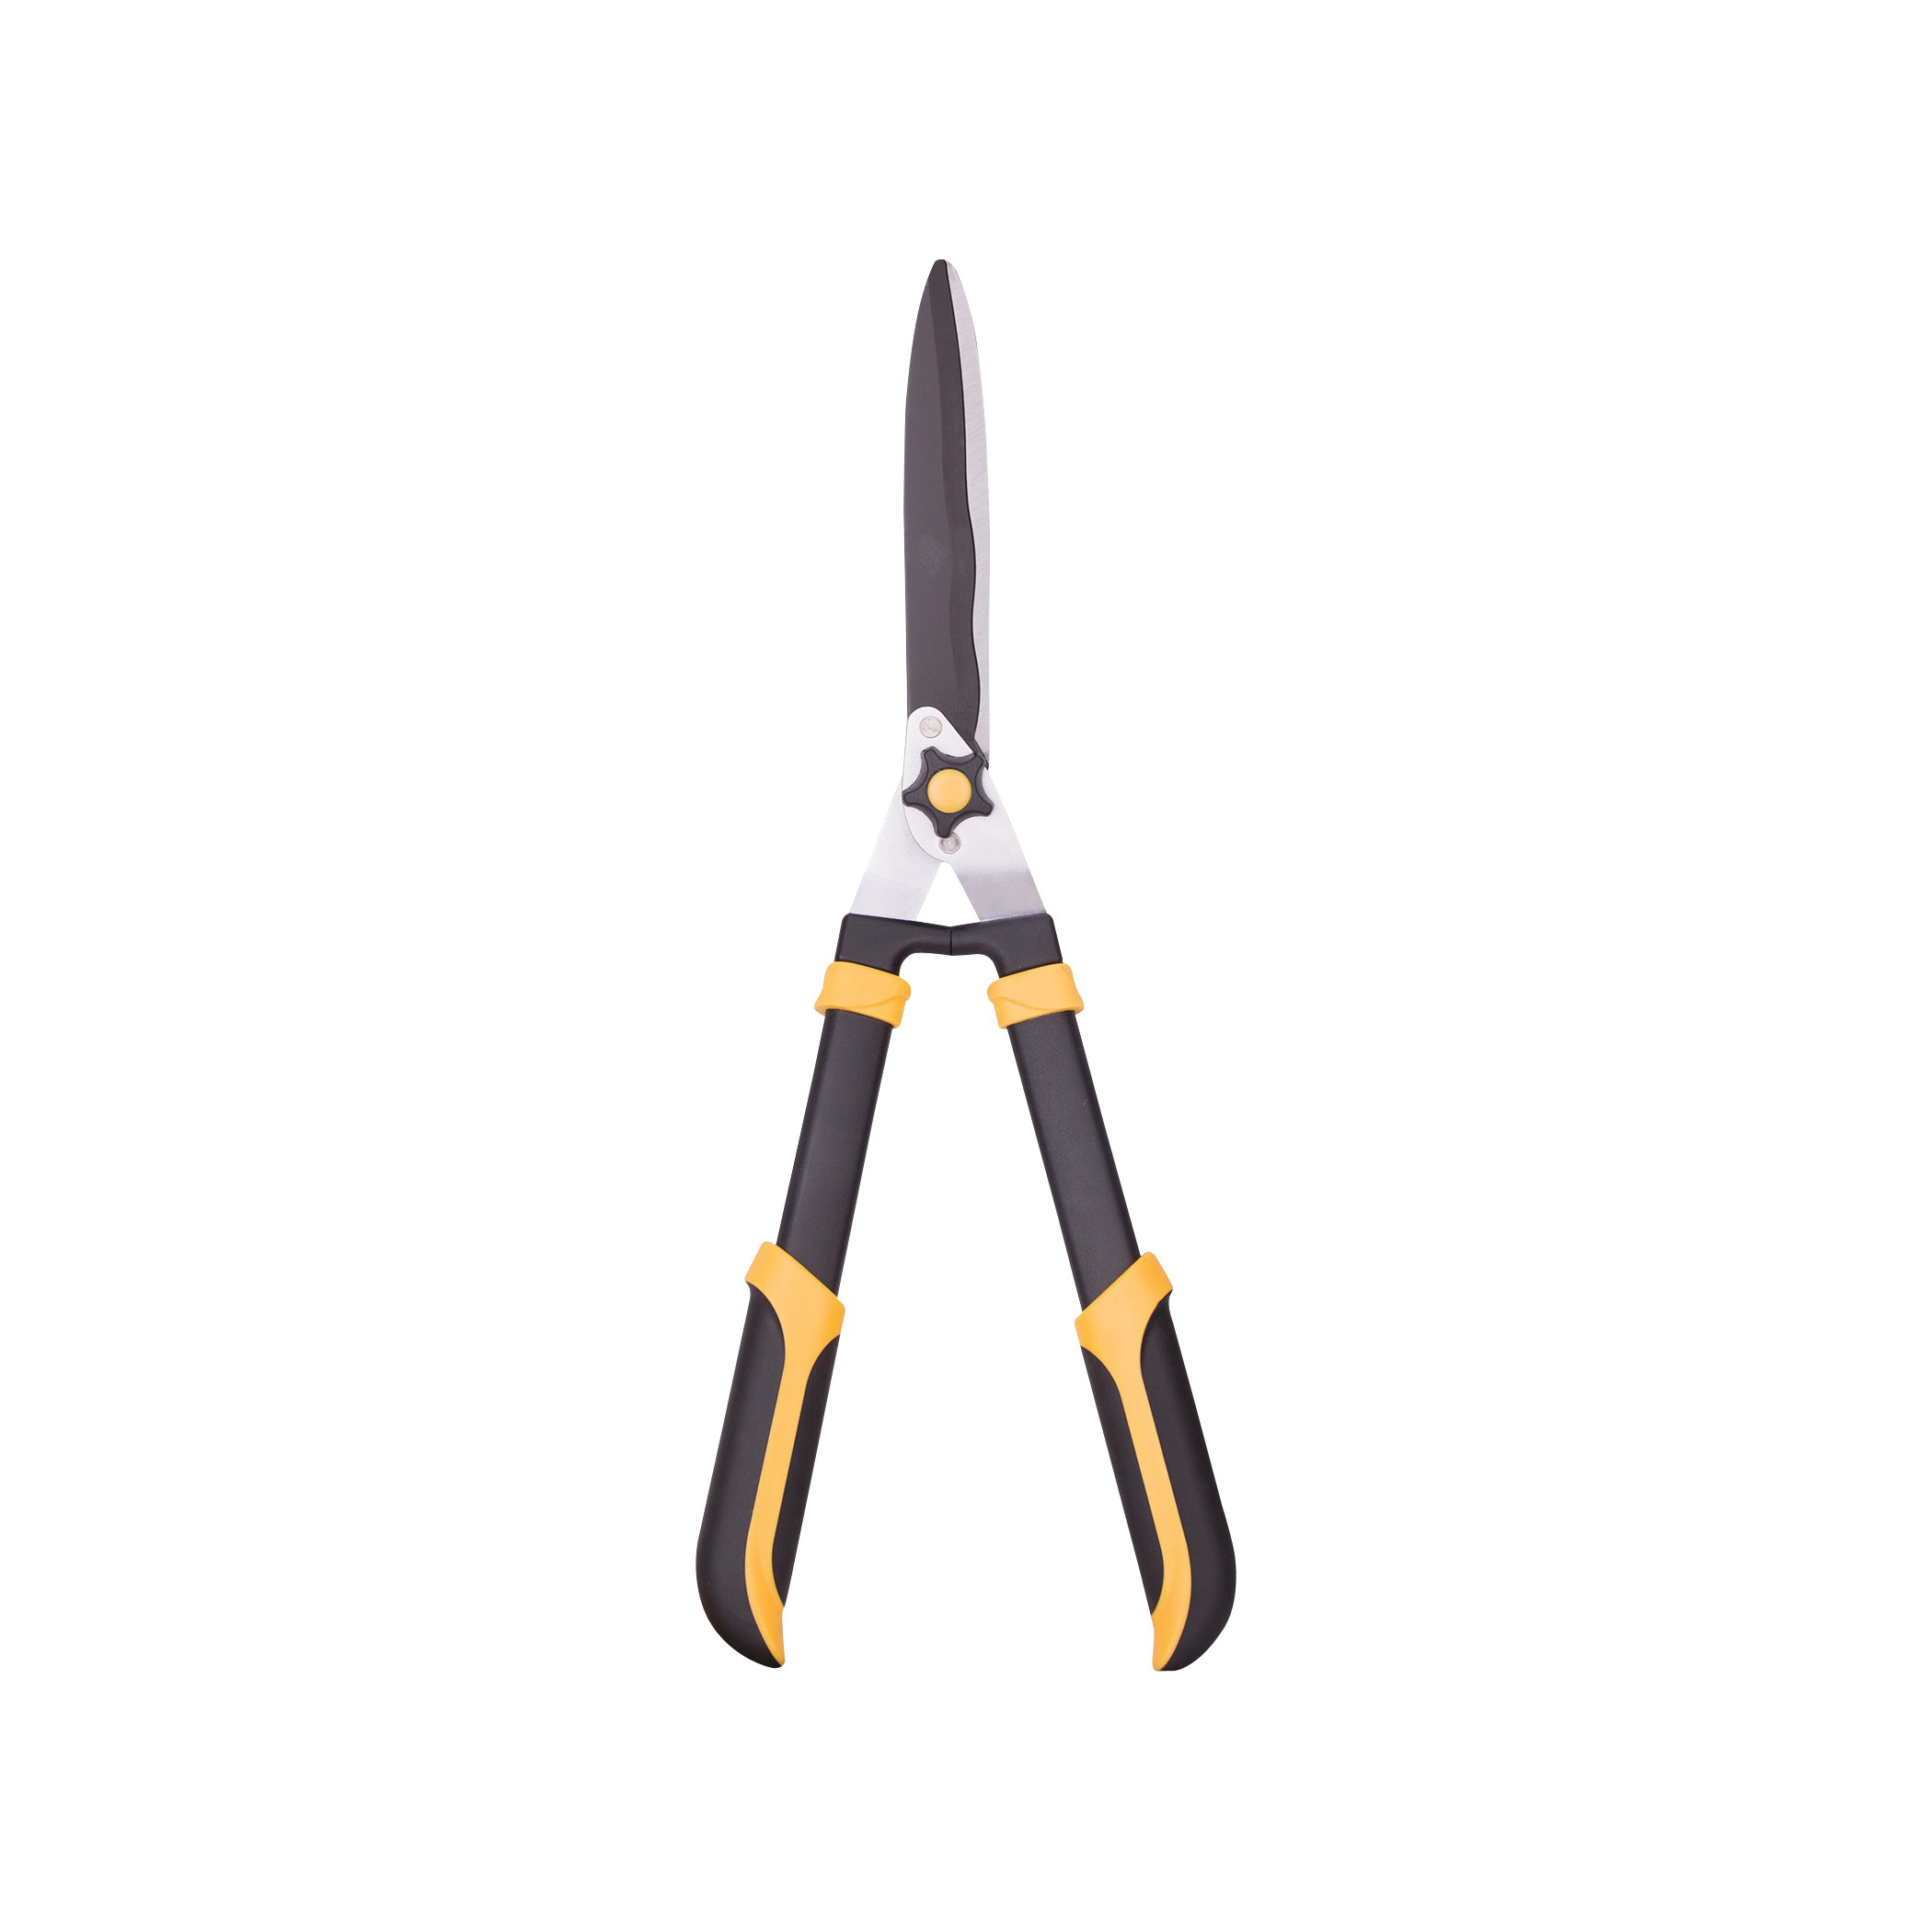 GH3196 Heavy-Duty Hedge Shear, Straight with Wave Curve Blade, 8 L Blade, Steel Blade, 22 in OAL